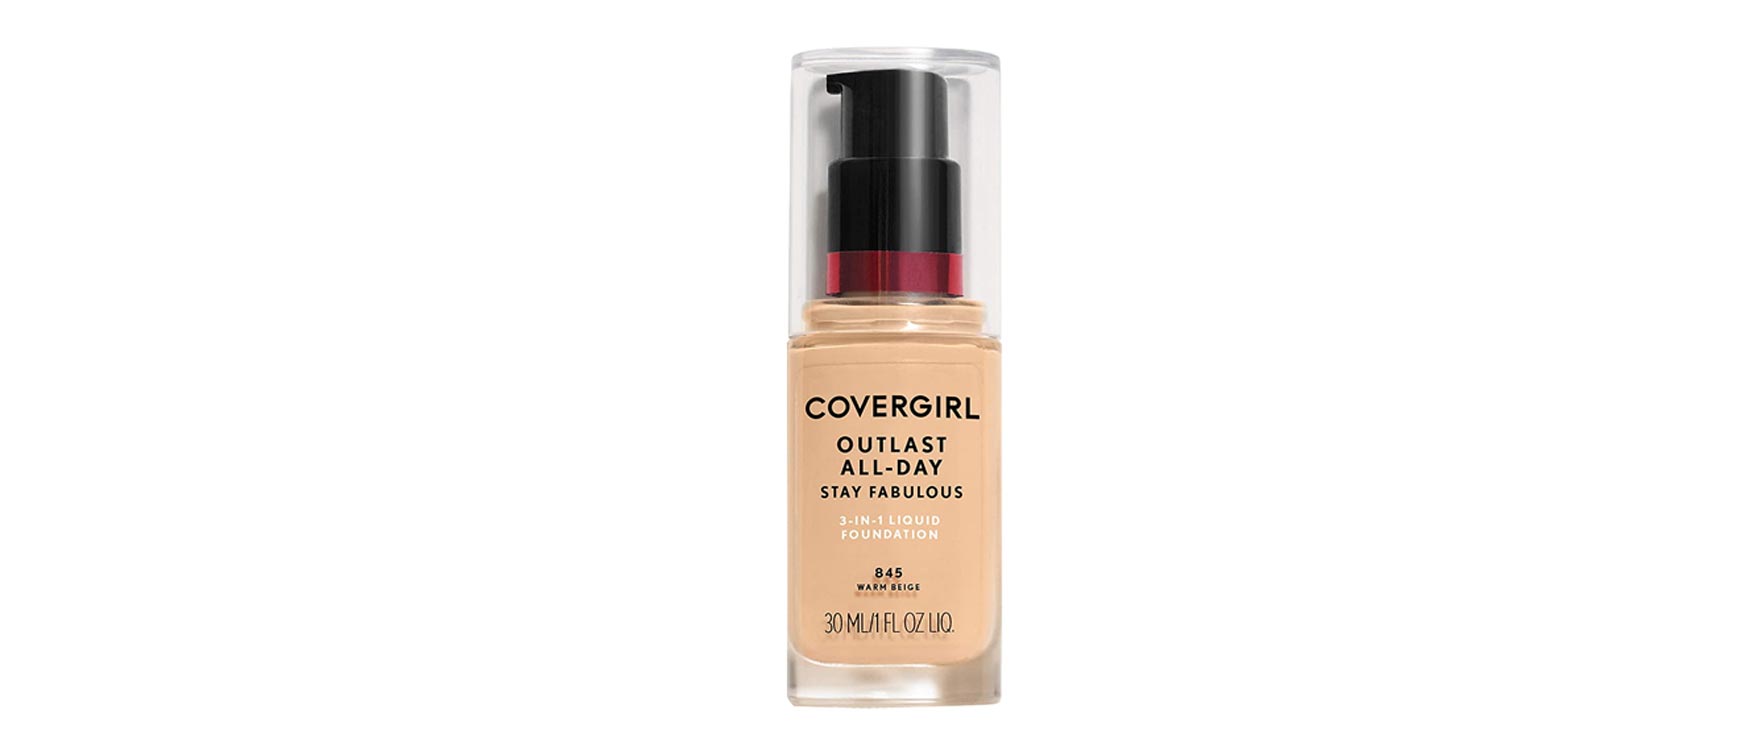 5. Cover Girl Outlast All-Day Stay Fabulous Foundation